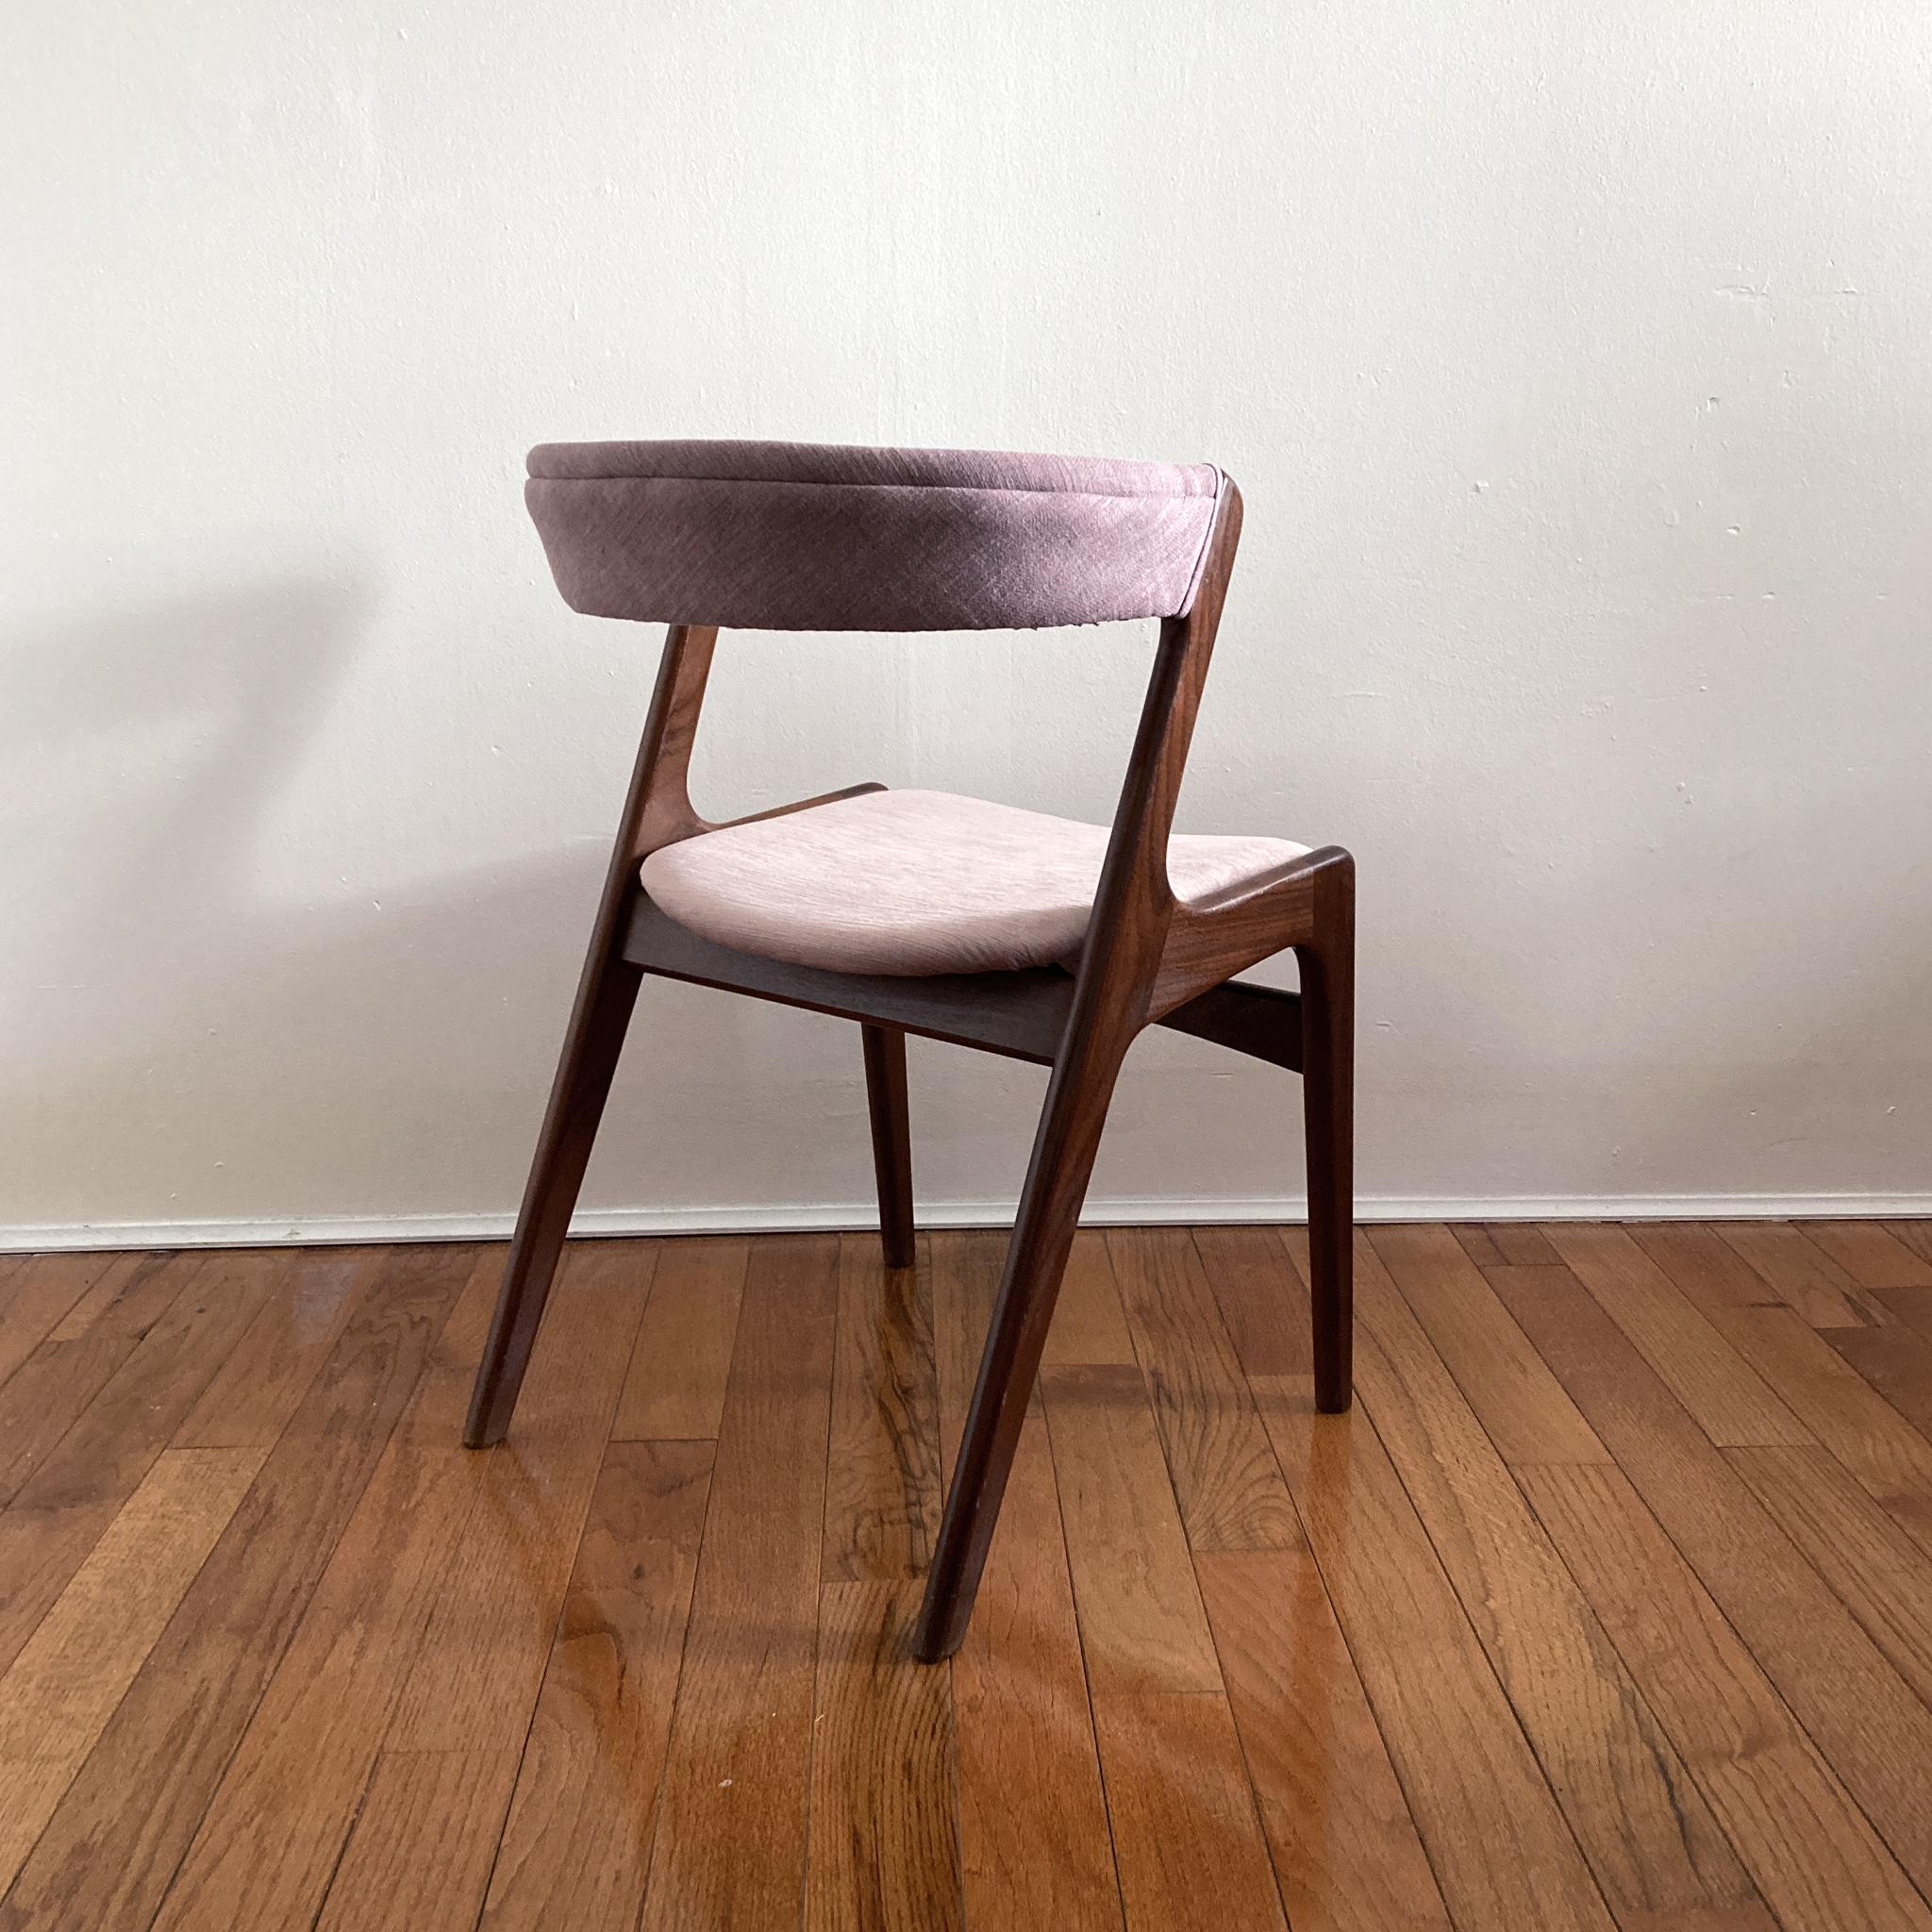 Kai Kristiansen Mauve Pink Curved Back Chair, 1960s In Good Condition For Sale In New York, NY